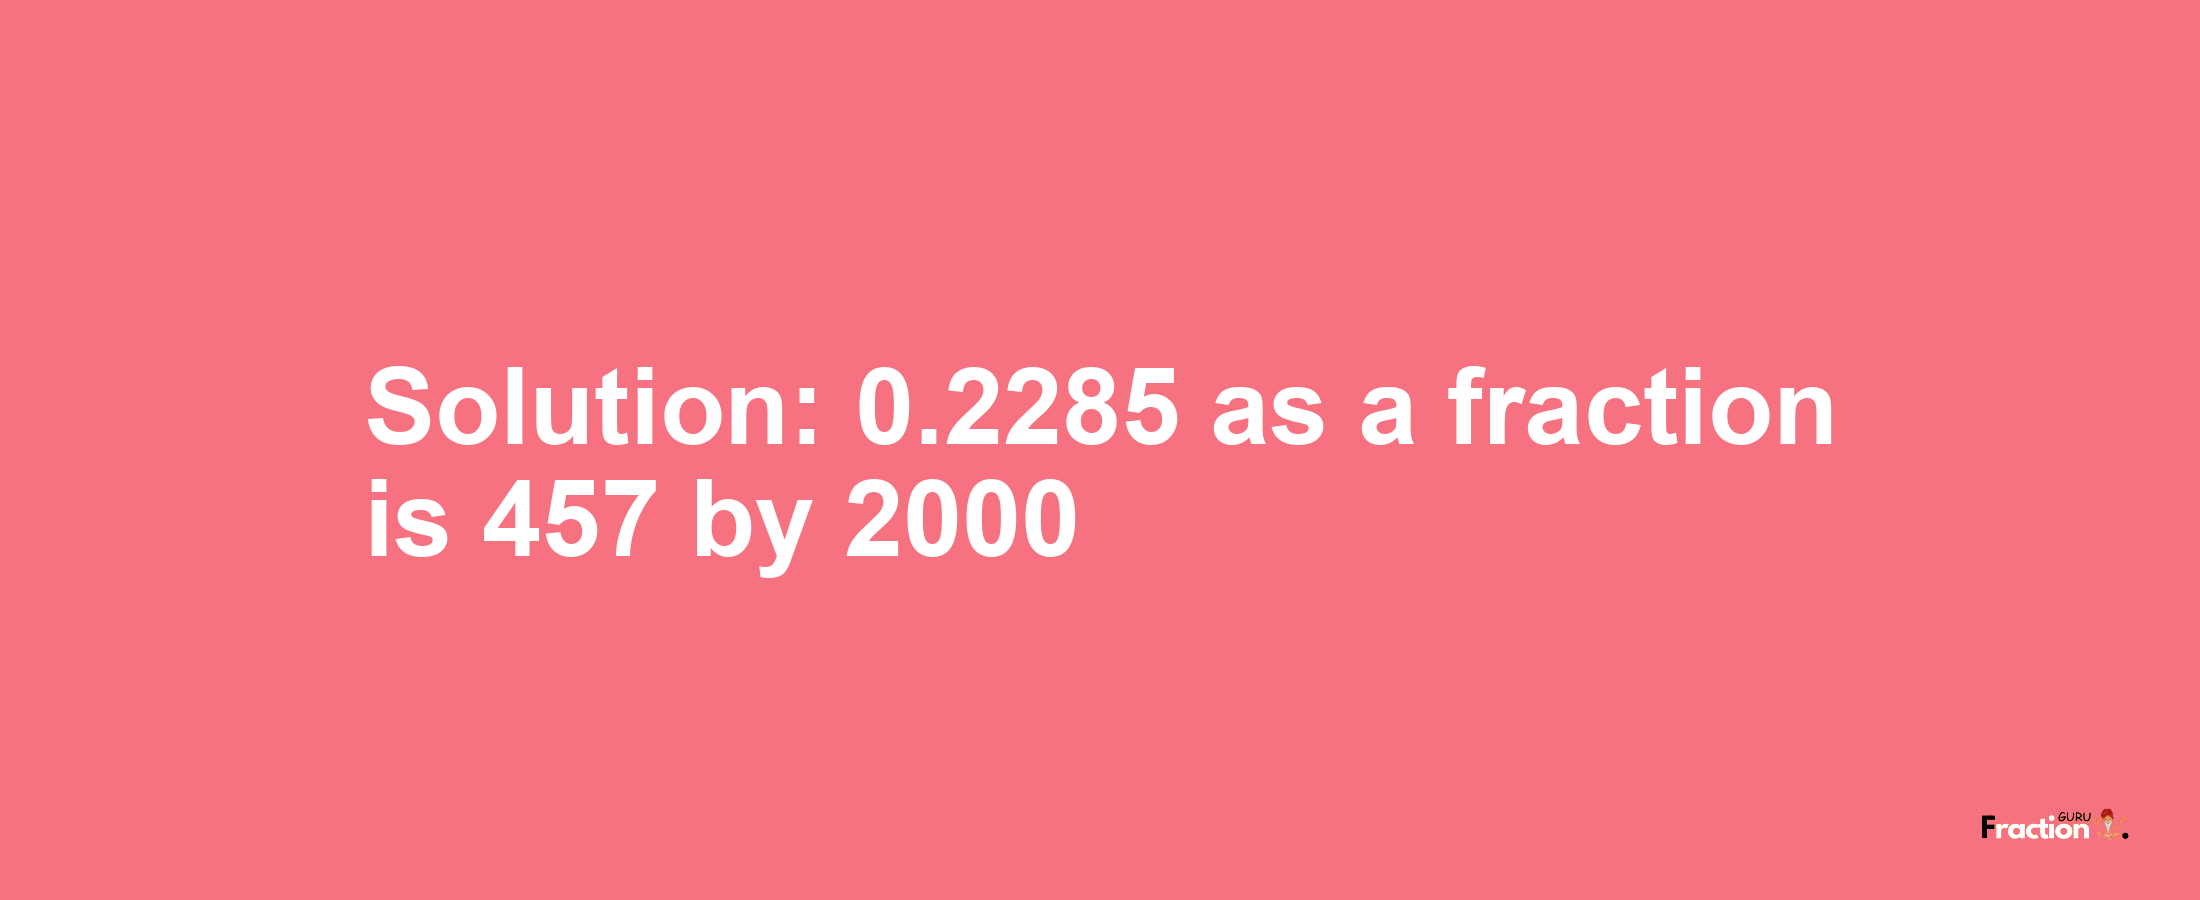 Solution:0.2285 as a fraction is 457/2000